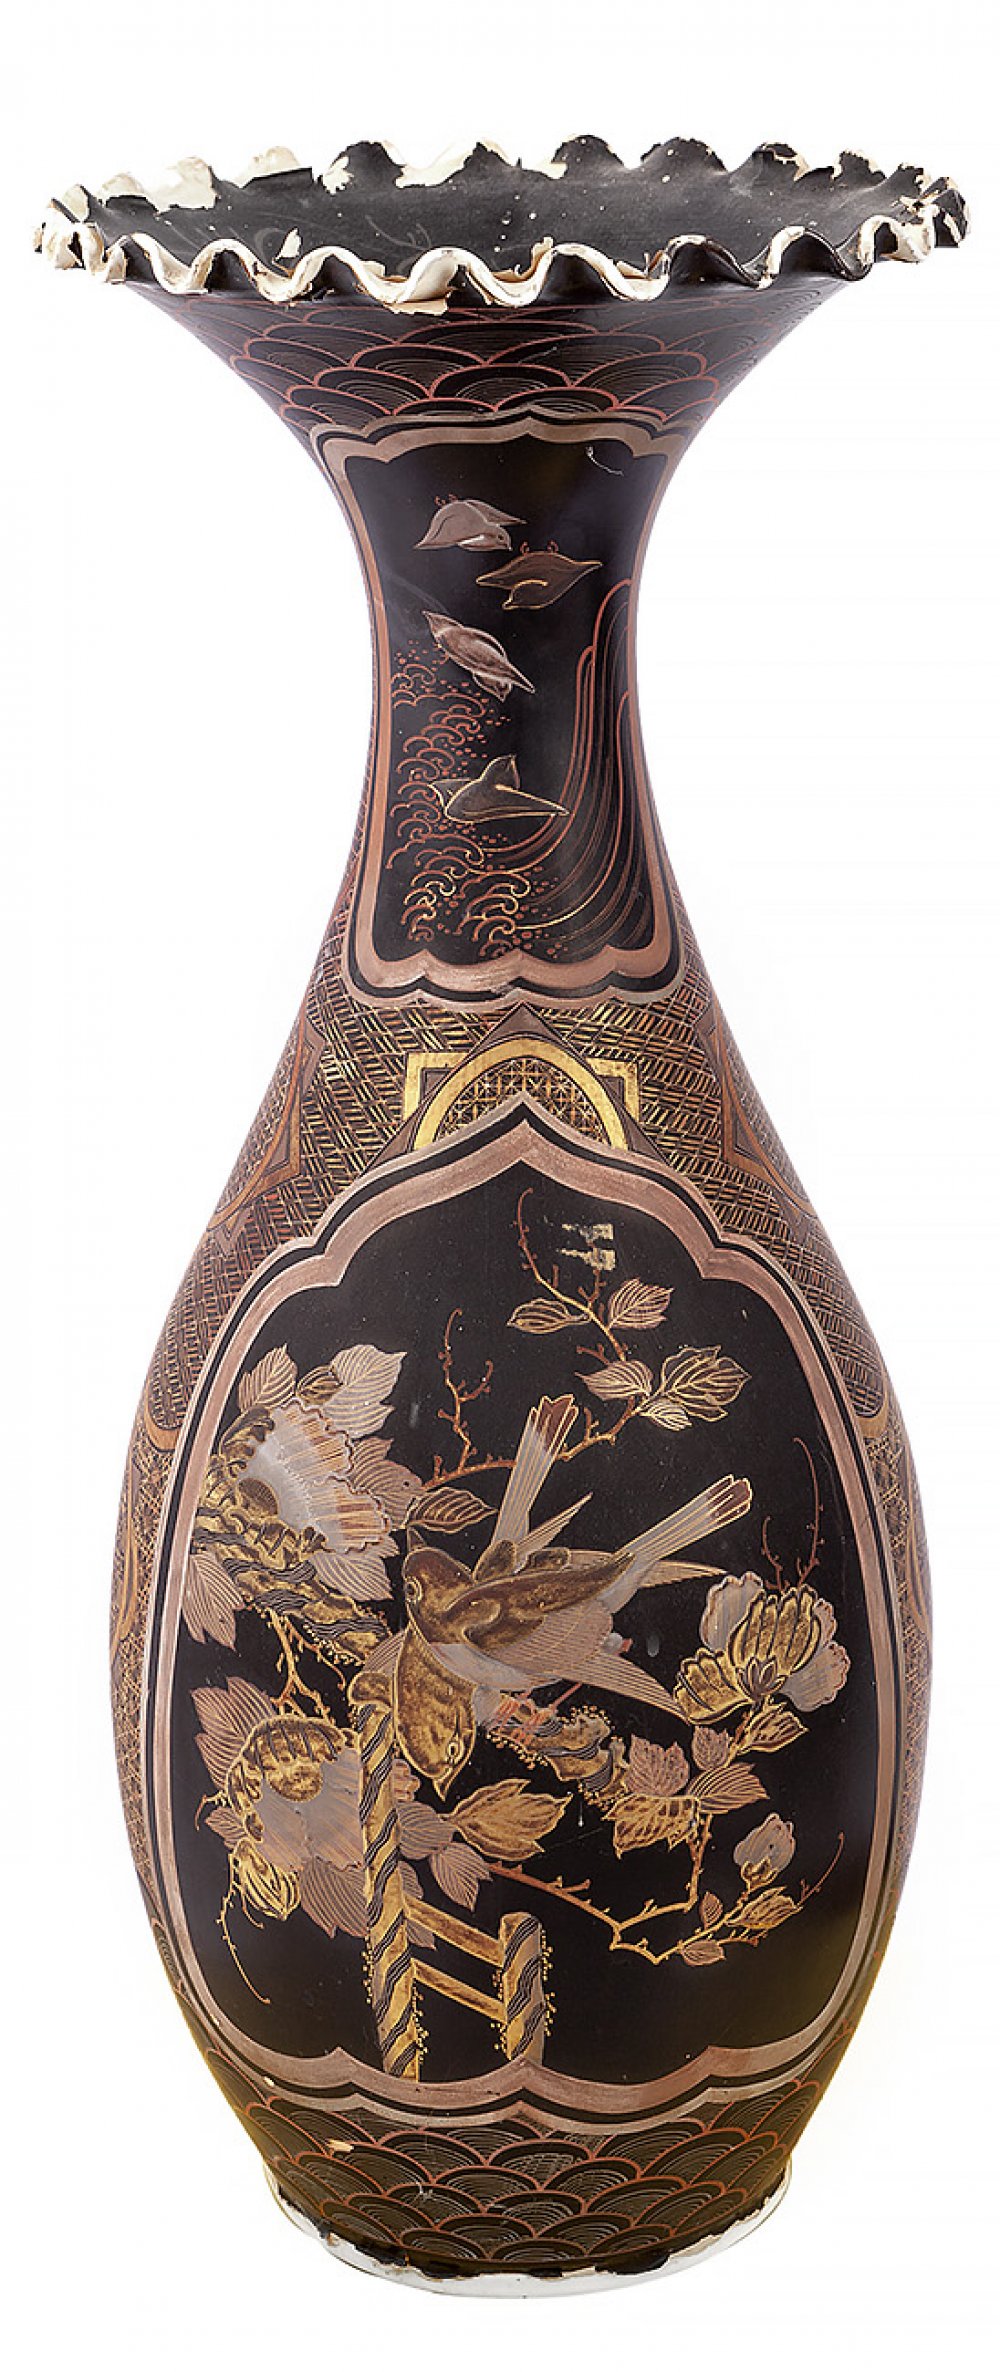 20th century Chinese vase.Porcelain.It presents small damages in the upper part.Measurements: 62 x